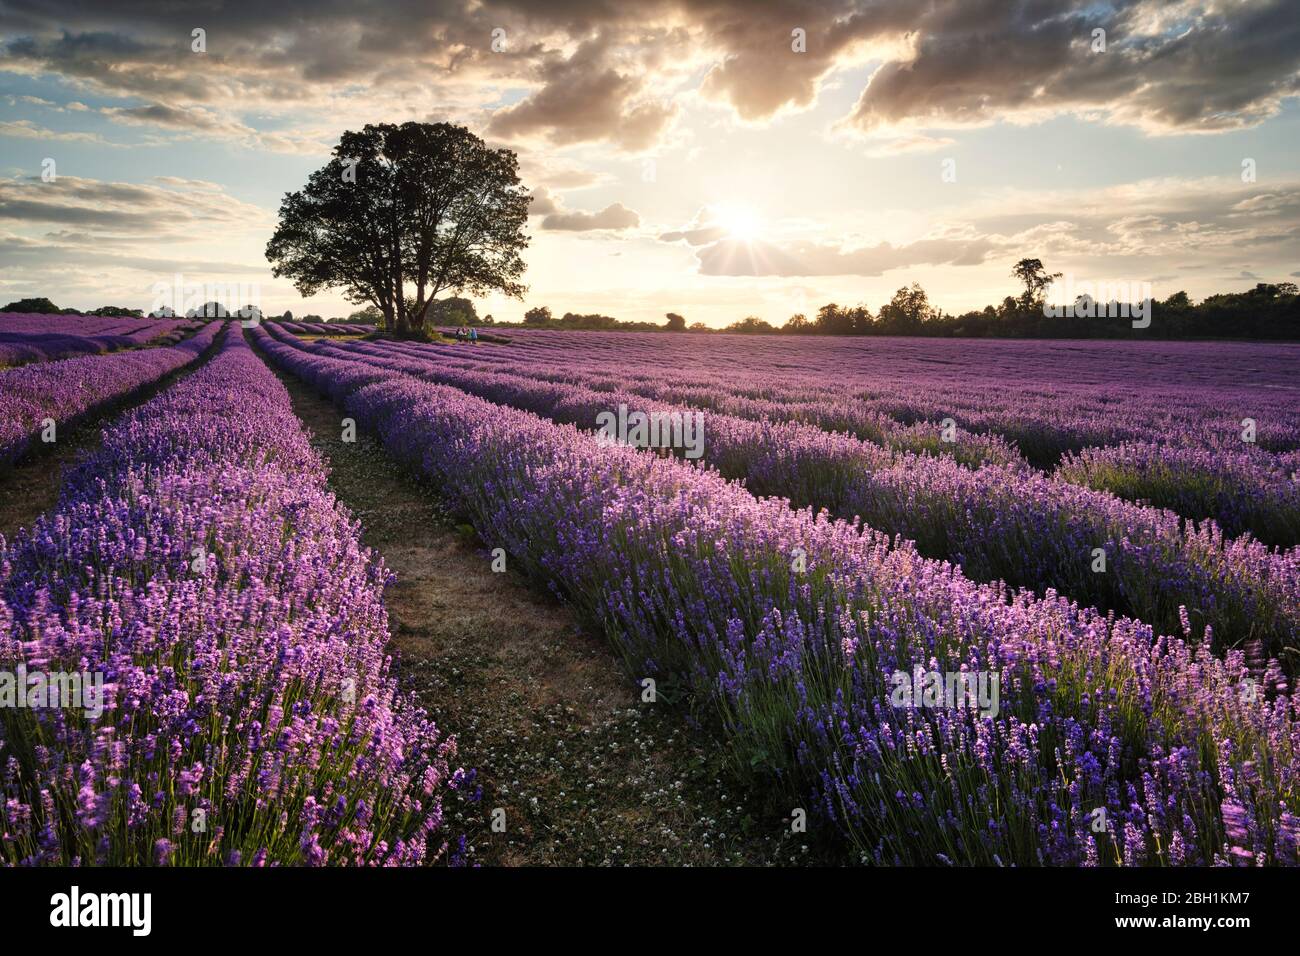 Organic Lavender field grown for essential oils Stock Photo